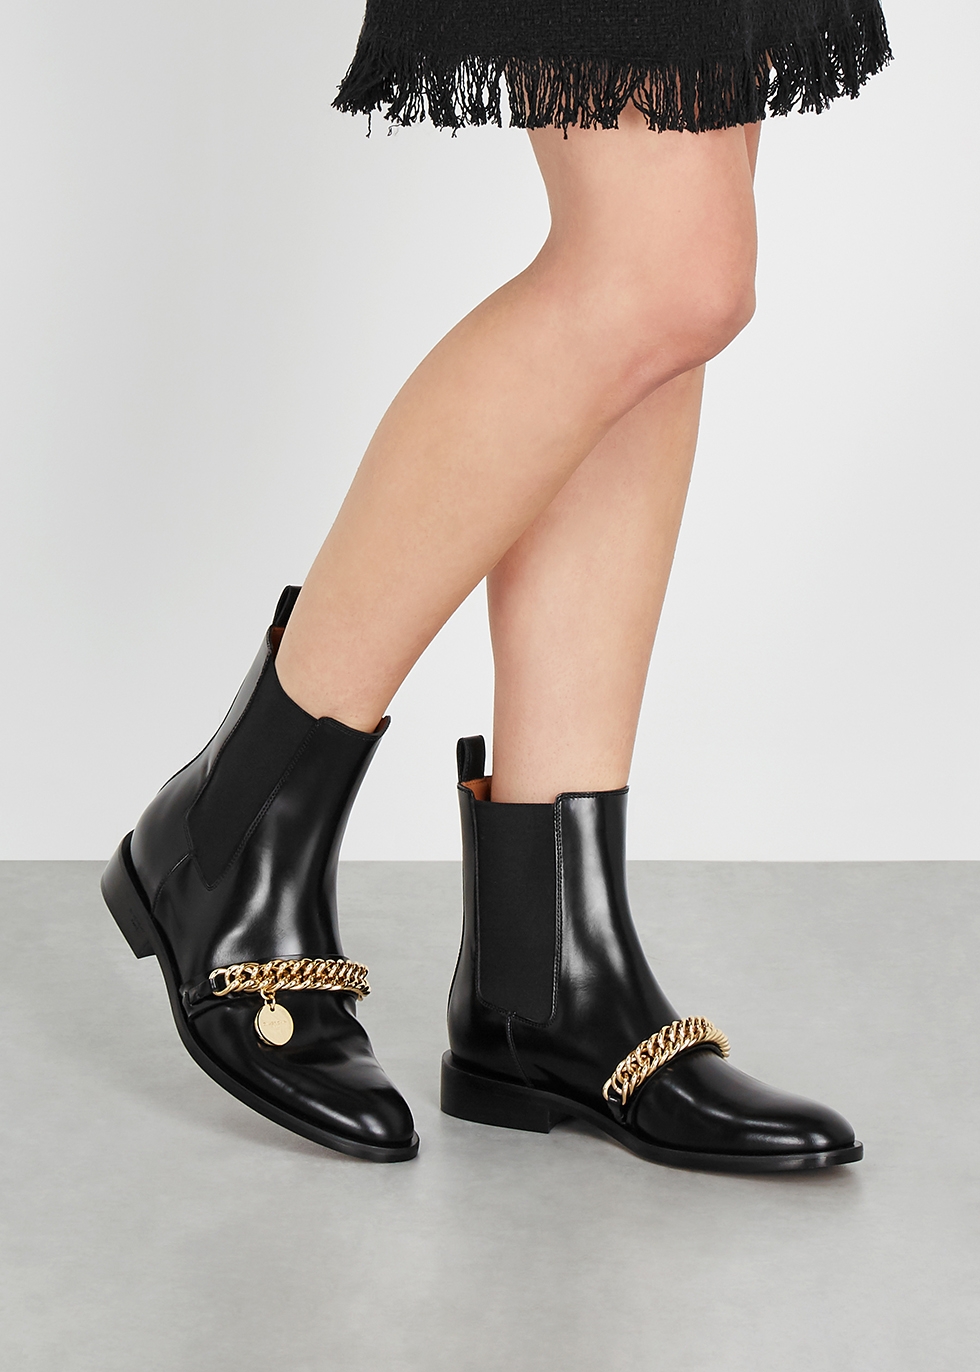 givenchy chain boots